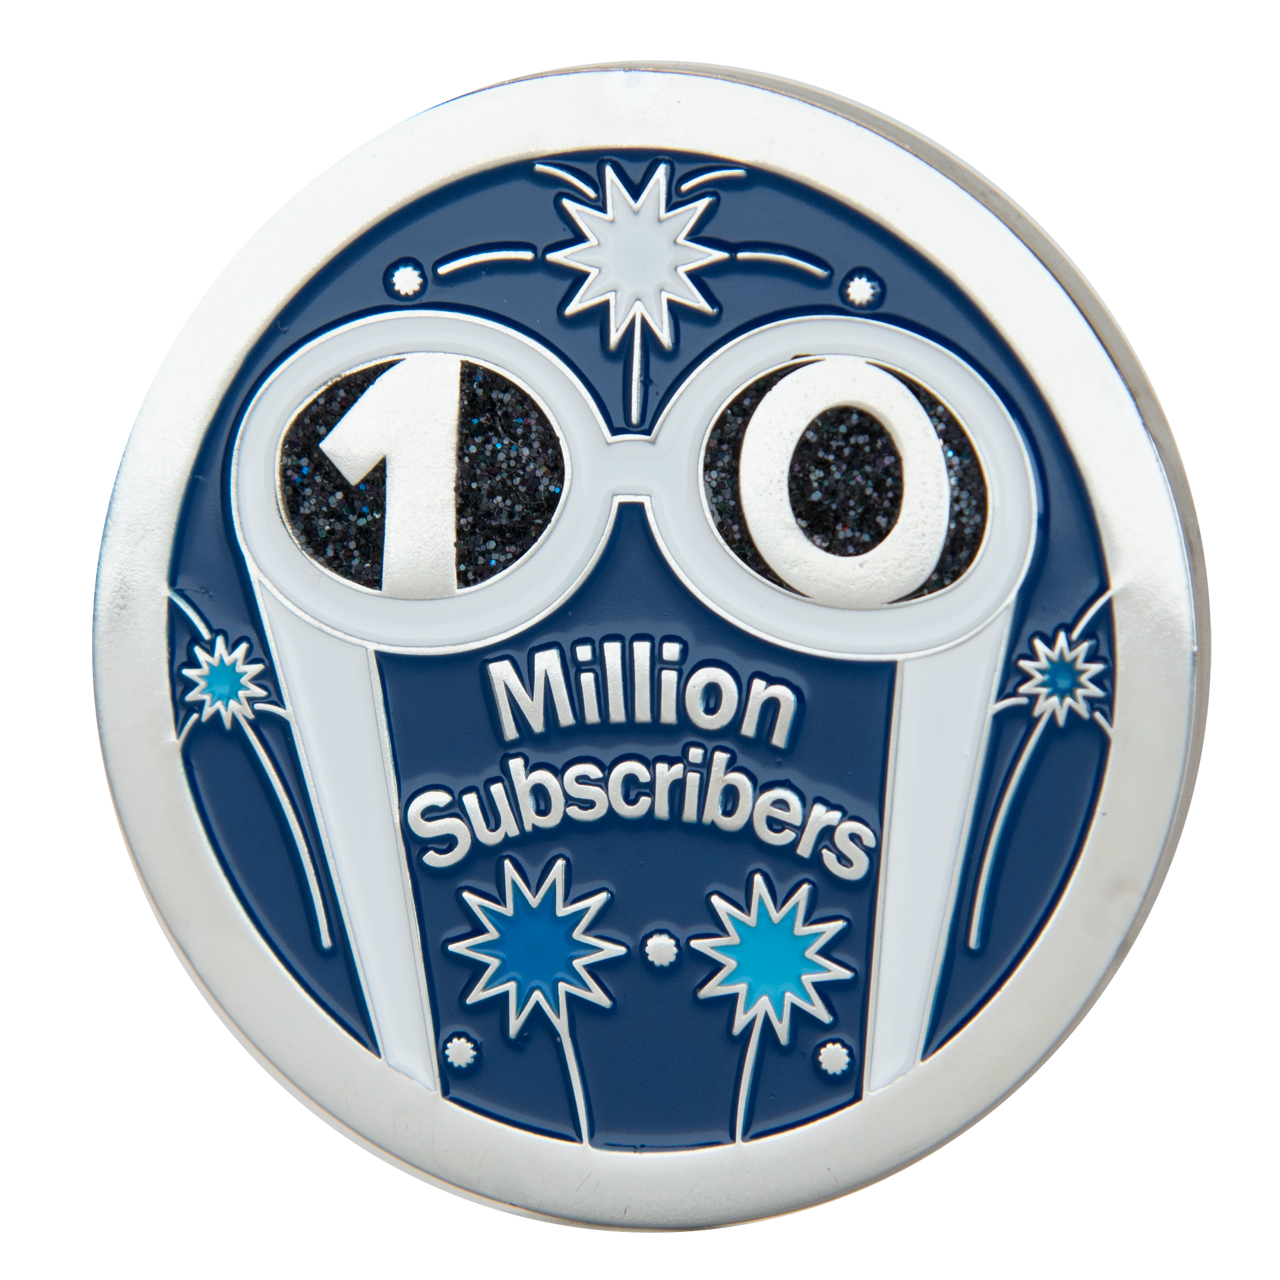 George 10 Million Subscribers Coin, Limited Edition